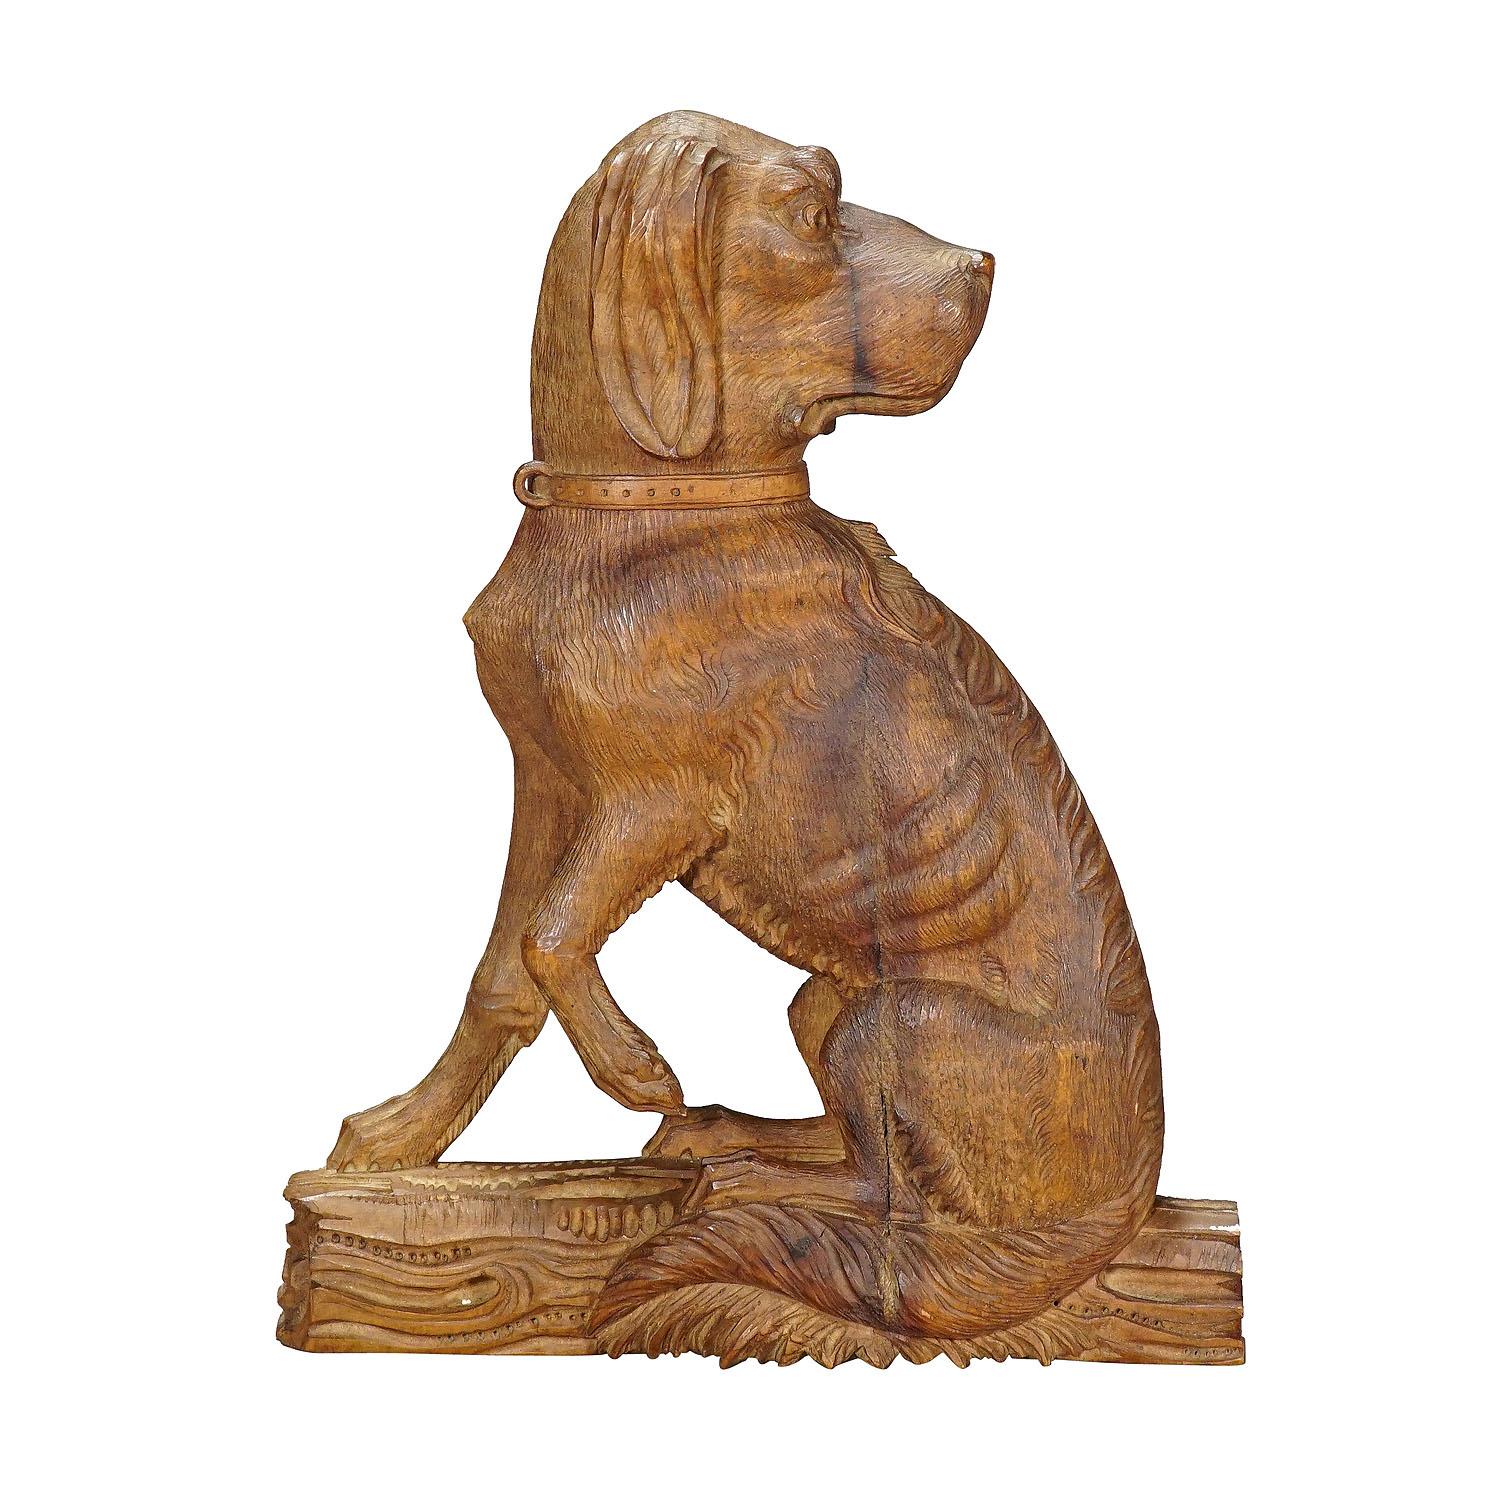 Fine Carved Statue of a Staghound, circa 1920

A wooden carved statue of a staghound. It is carved as half relief out of one piece of nutwood. Made in Brienz, Switzerland circa 1920.

The tradition of wood carving in Brienz dates back to mid of the